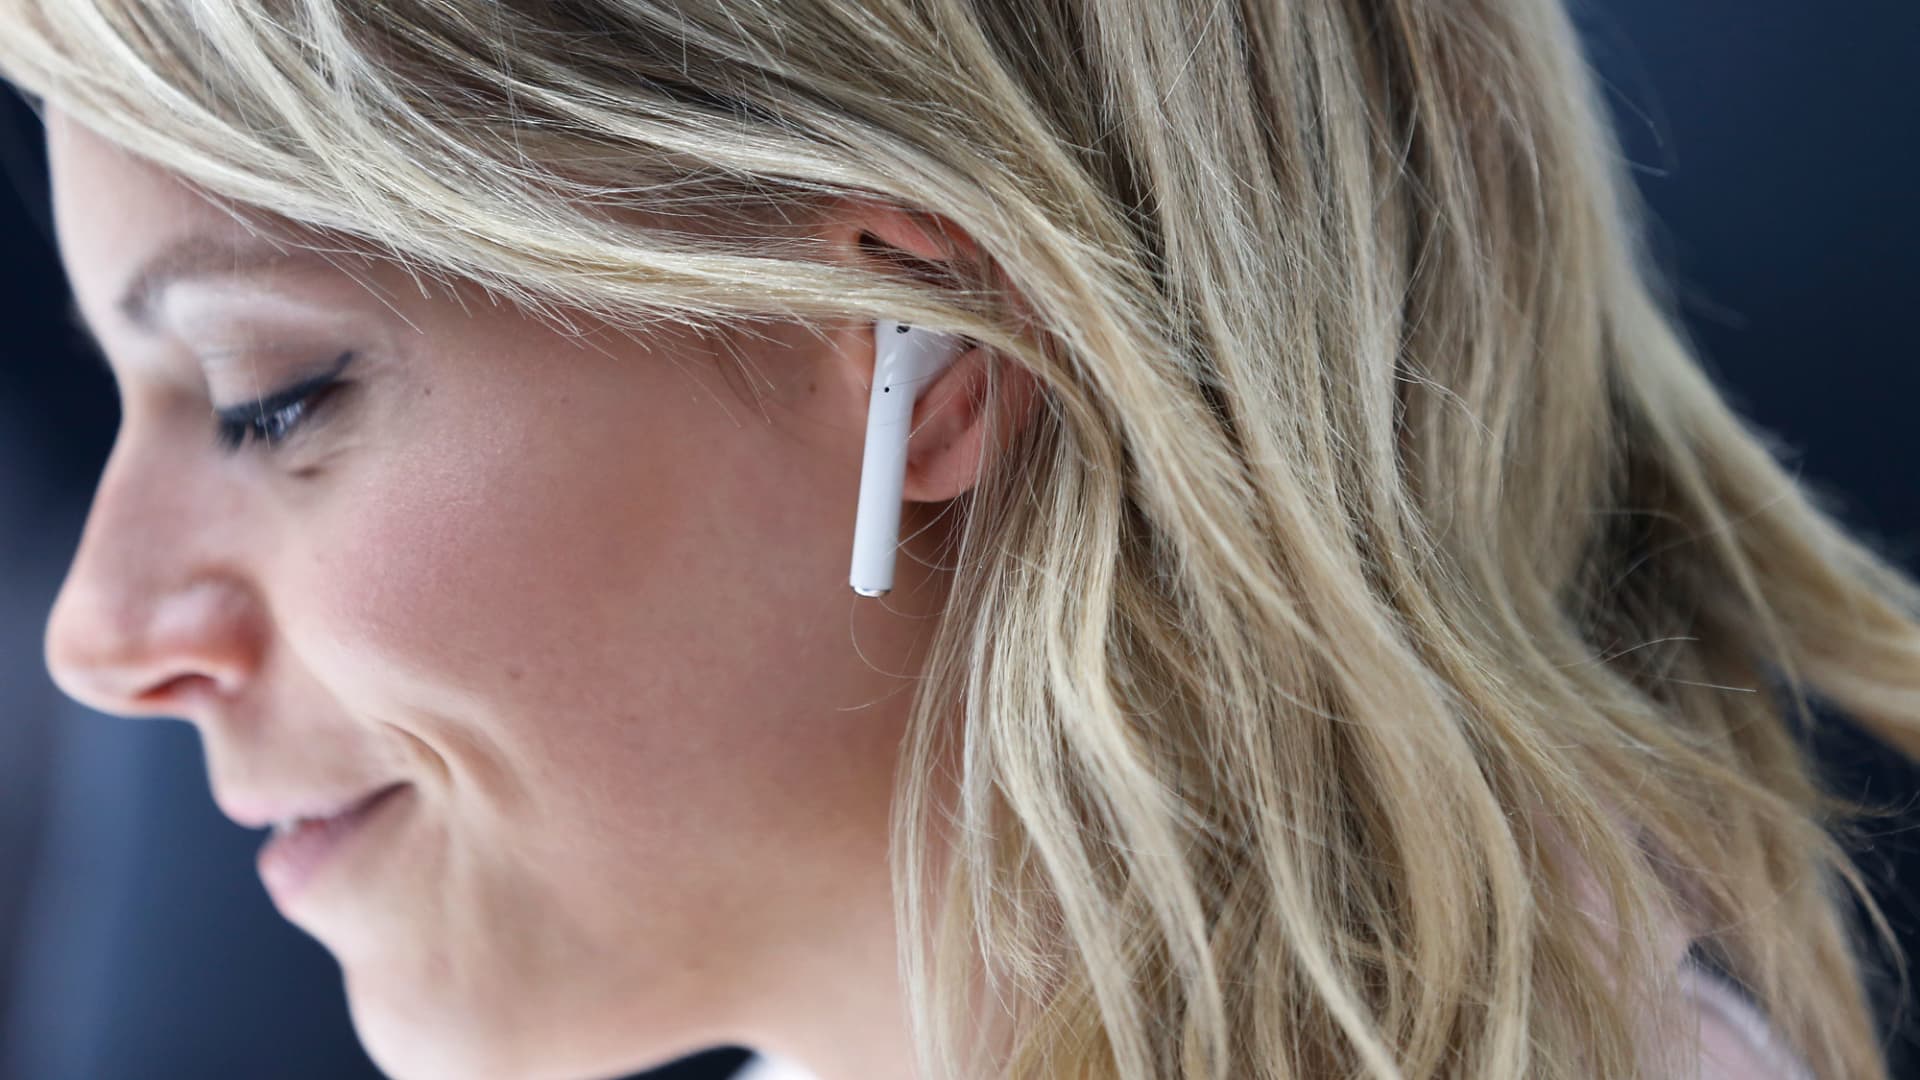 Apple reportedly will launch new AirPods, AirPods Pro to further boost wearables business